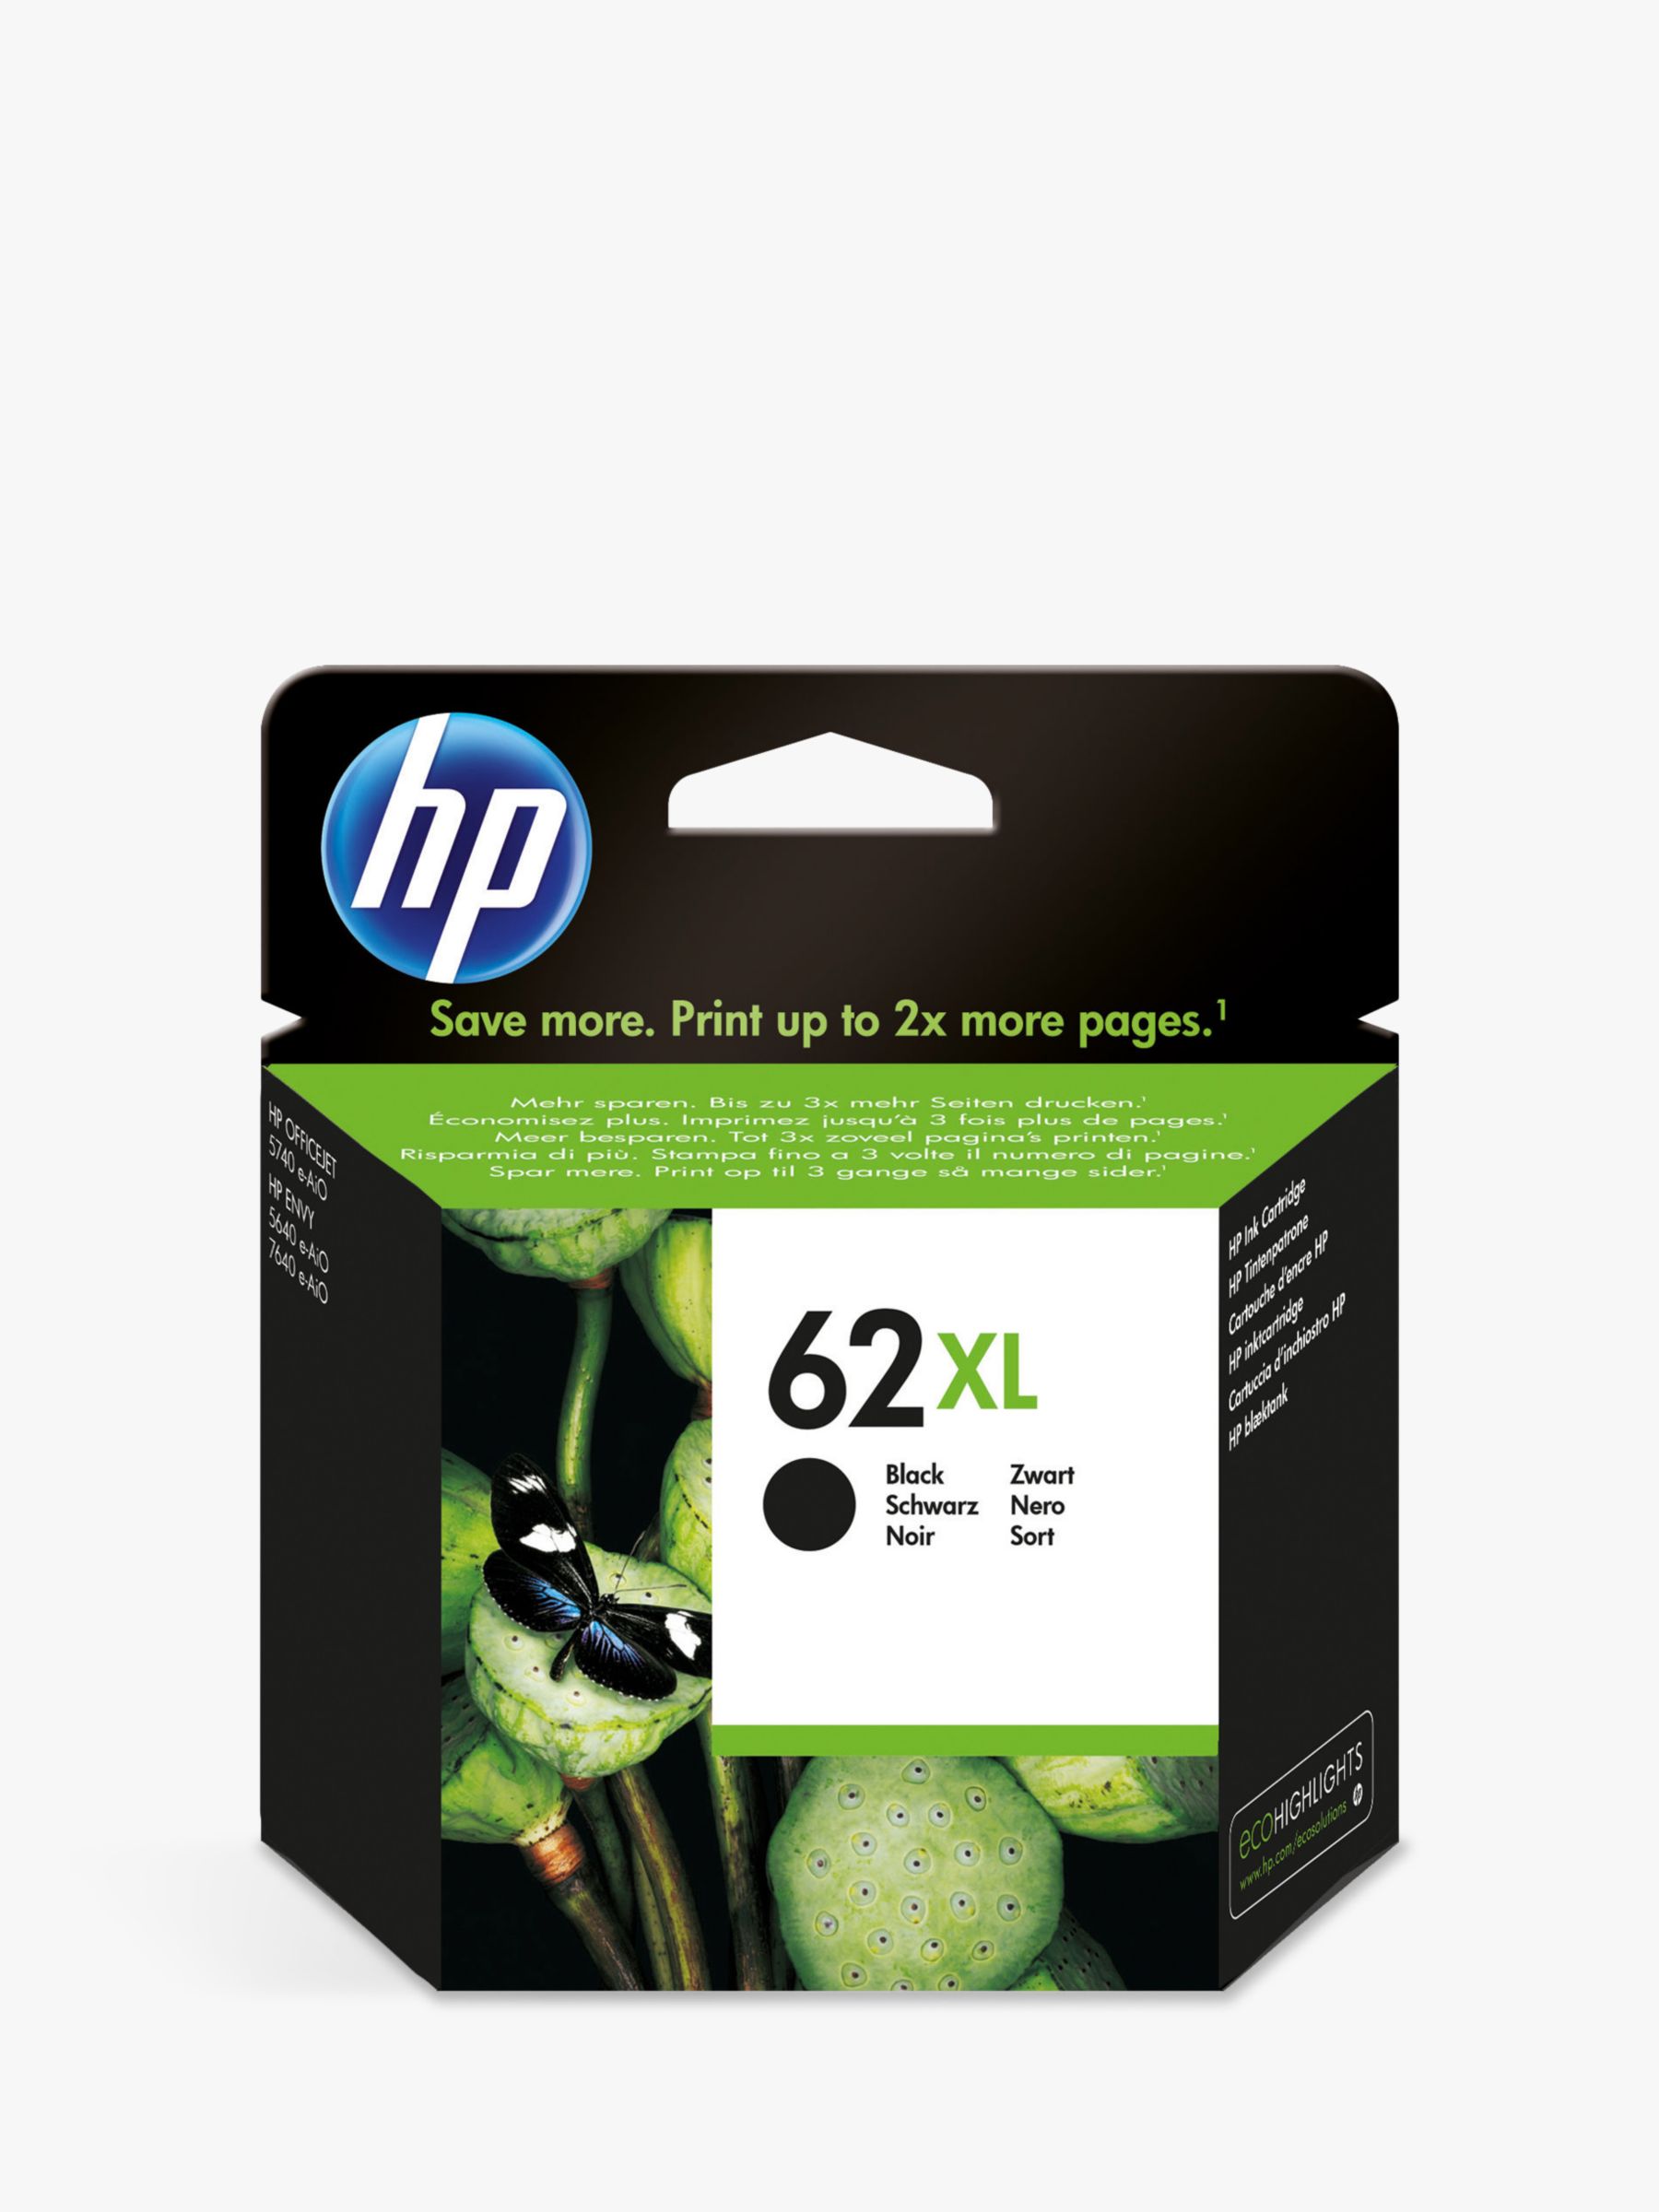 1 X Black + 1 X Colour Refilled Ink Cartridges Compatible with HP 62xl HP  62 XL